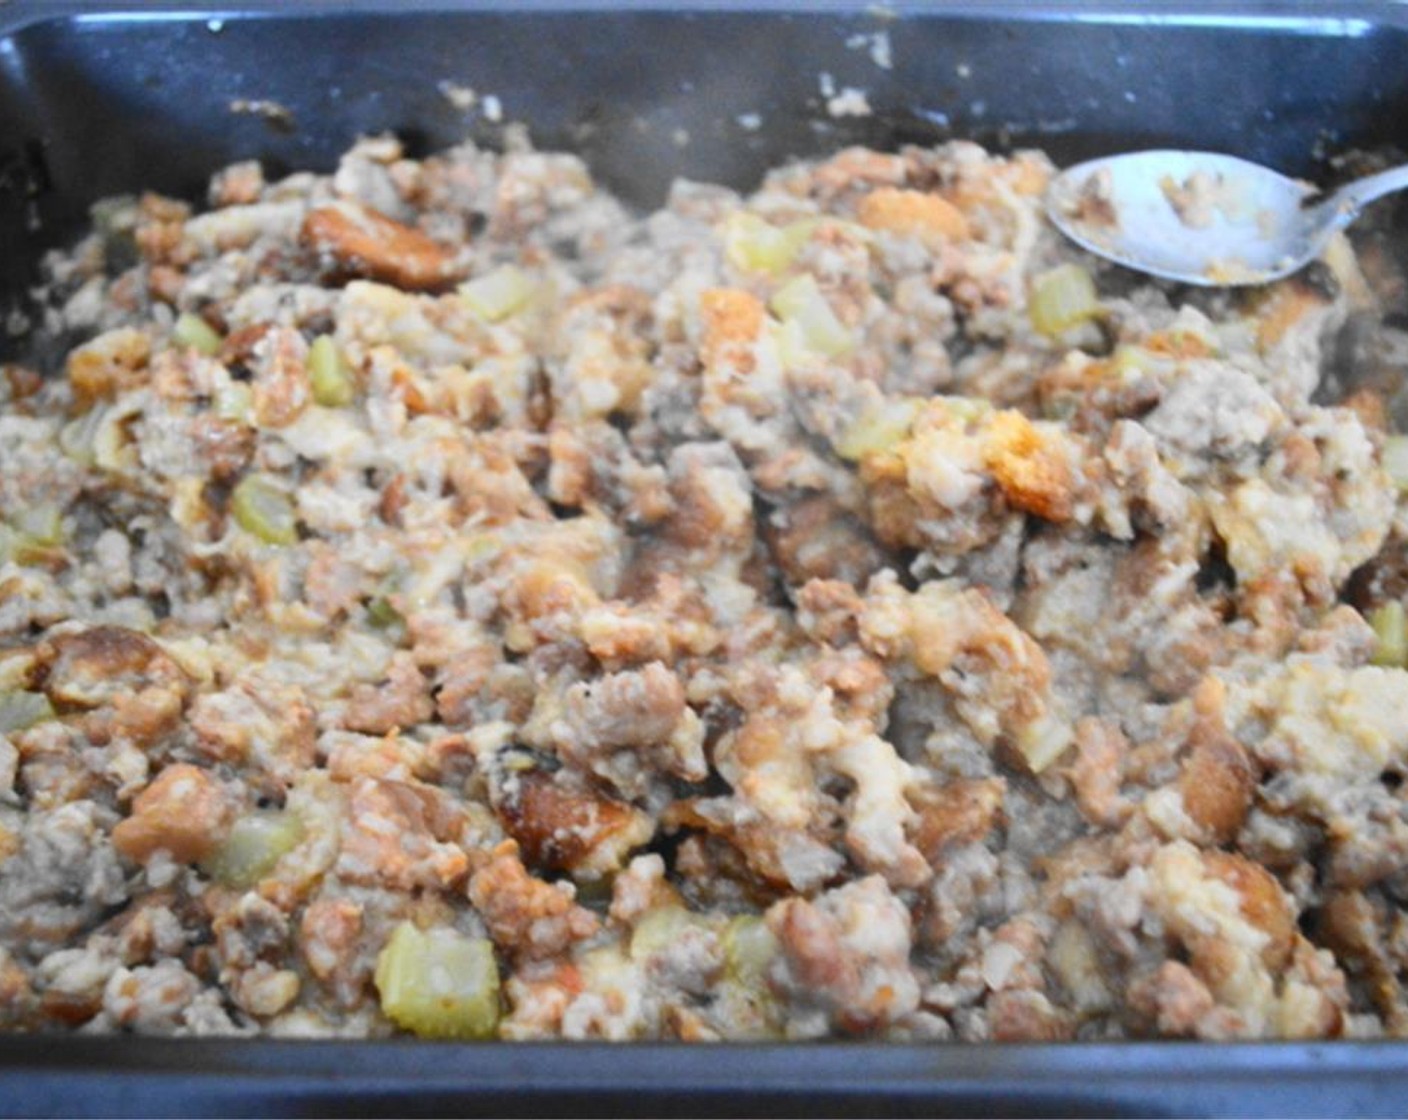 step 8 Bake the tray stuffing covered, for about an hour and a half. Bake for longer if you want the edges to be crispier.